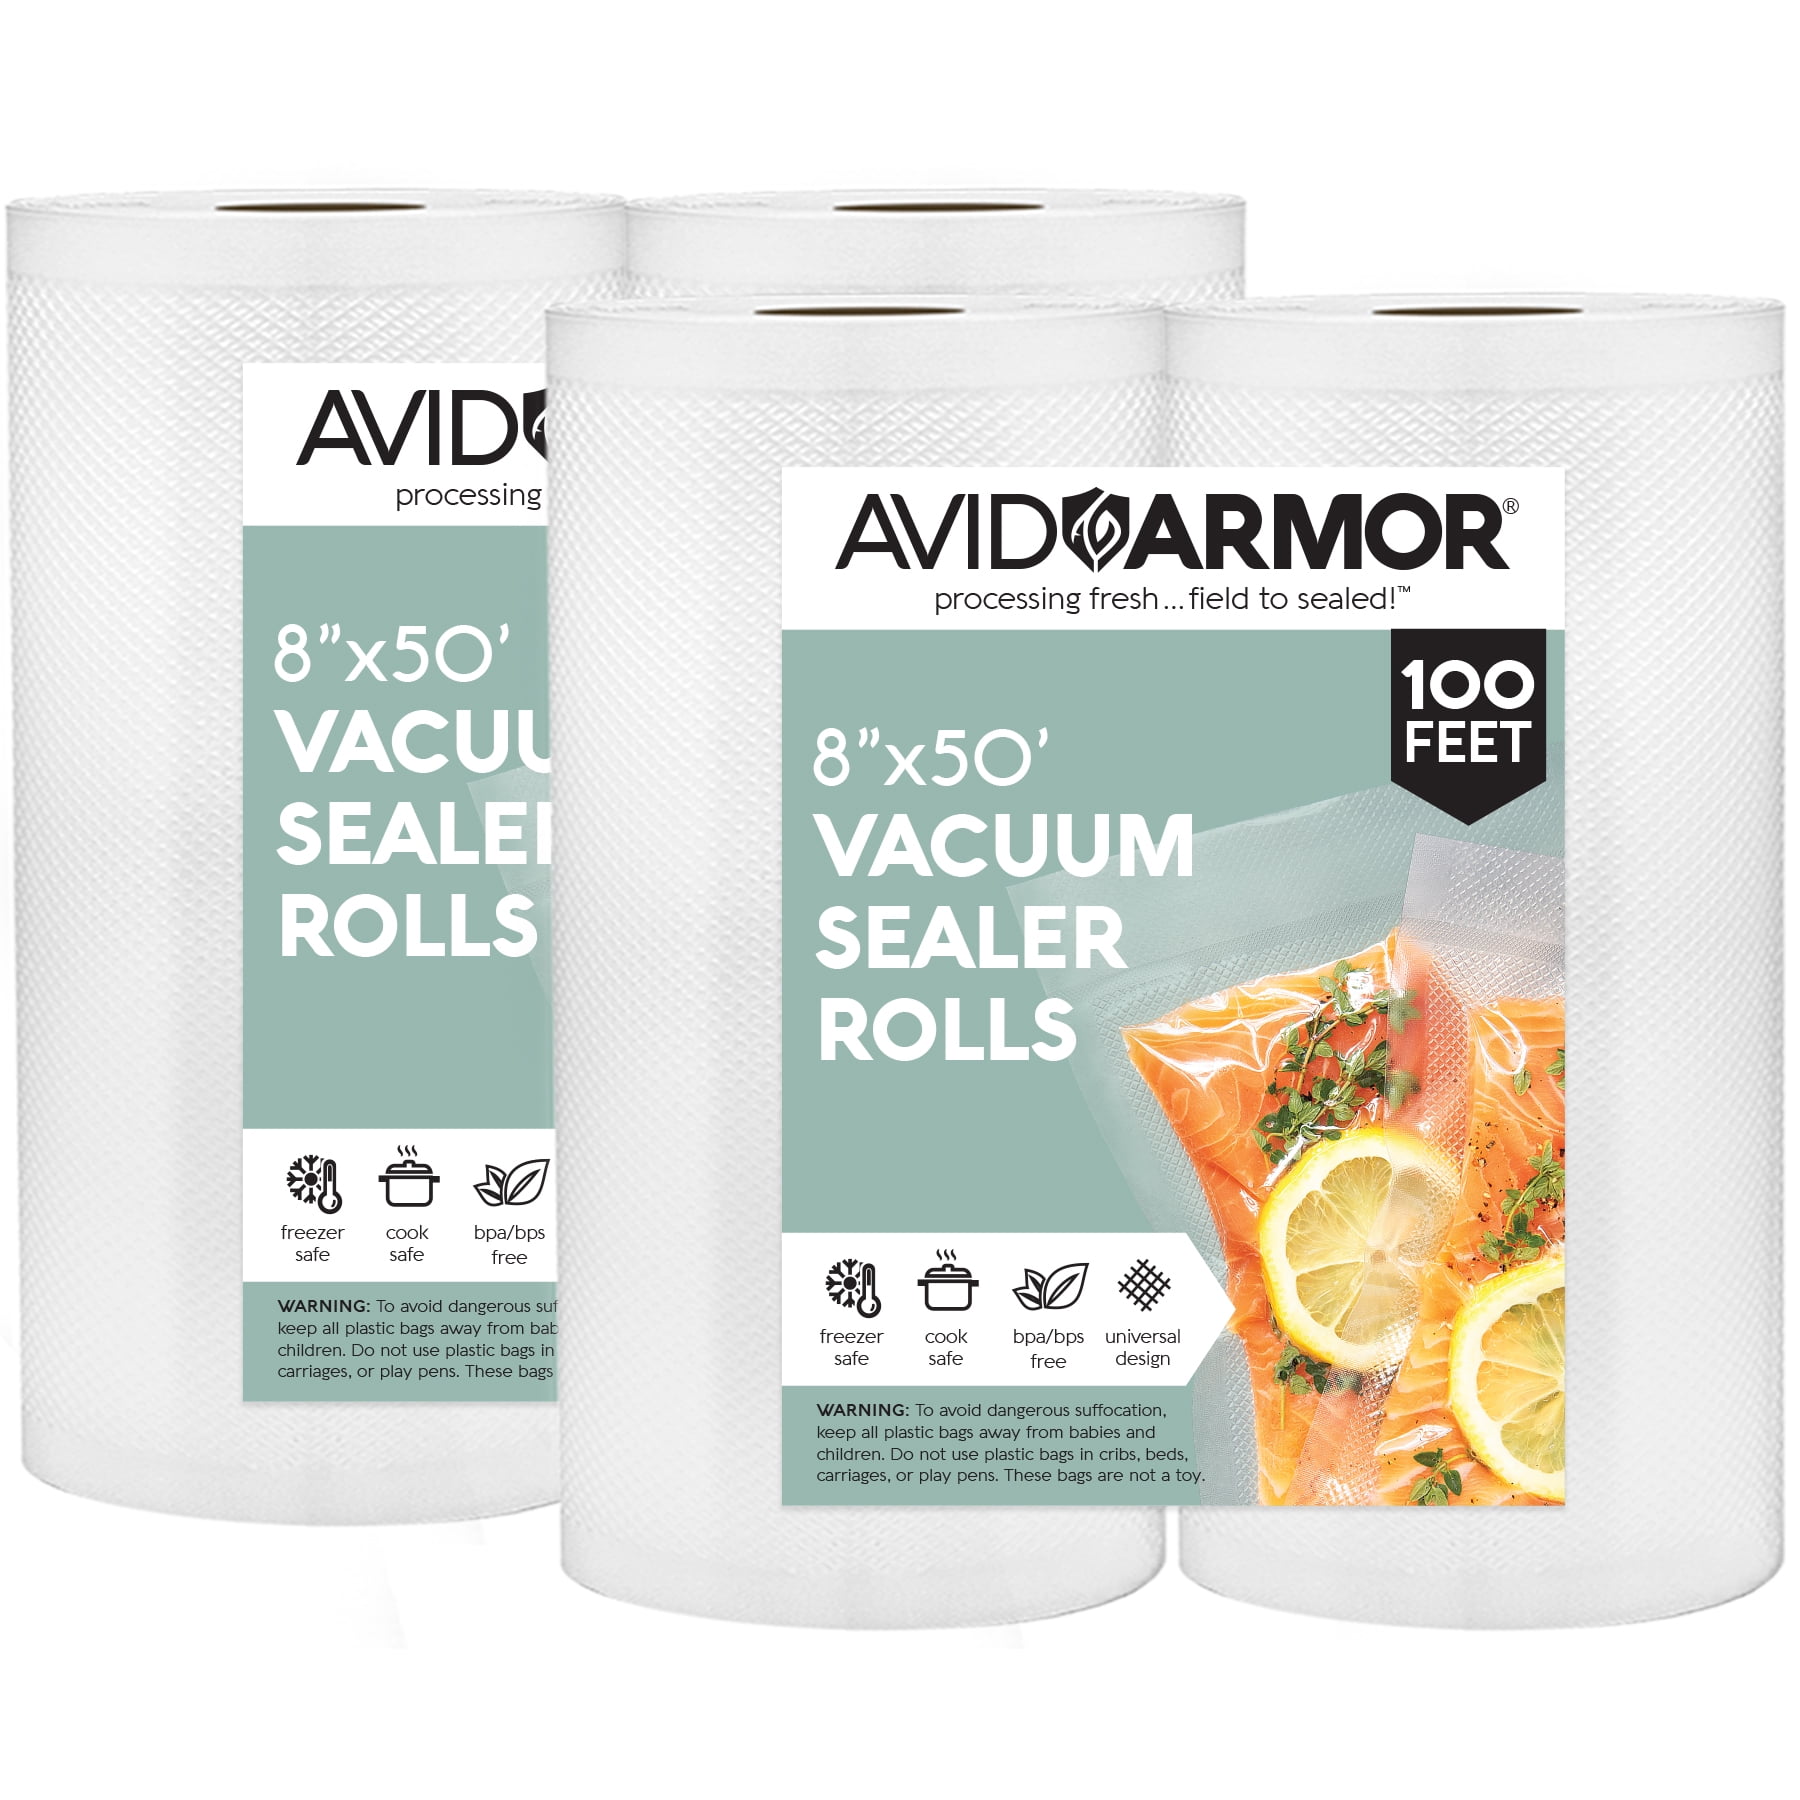 Avid Armor Vacuum Sealer Bags 11x50 Rolls 2 Pack for Food Saver, Seal a Meal  Vacuum Sealers Heavy Duty, BPA Free, Sous Vide Safe, Cut to Size Vacuum  Storage Bags, Universal Design